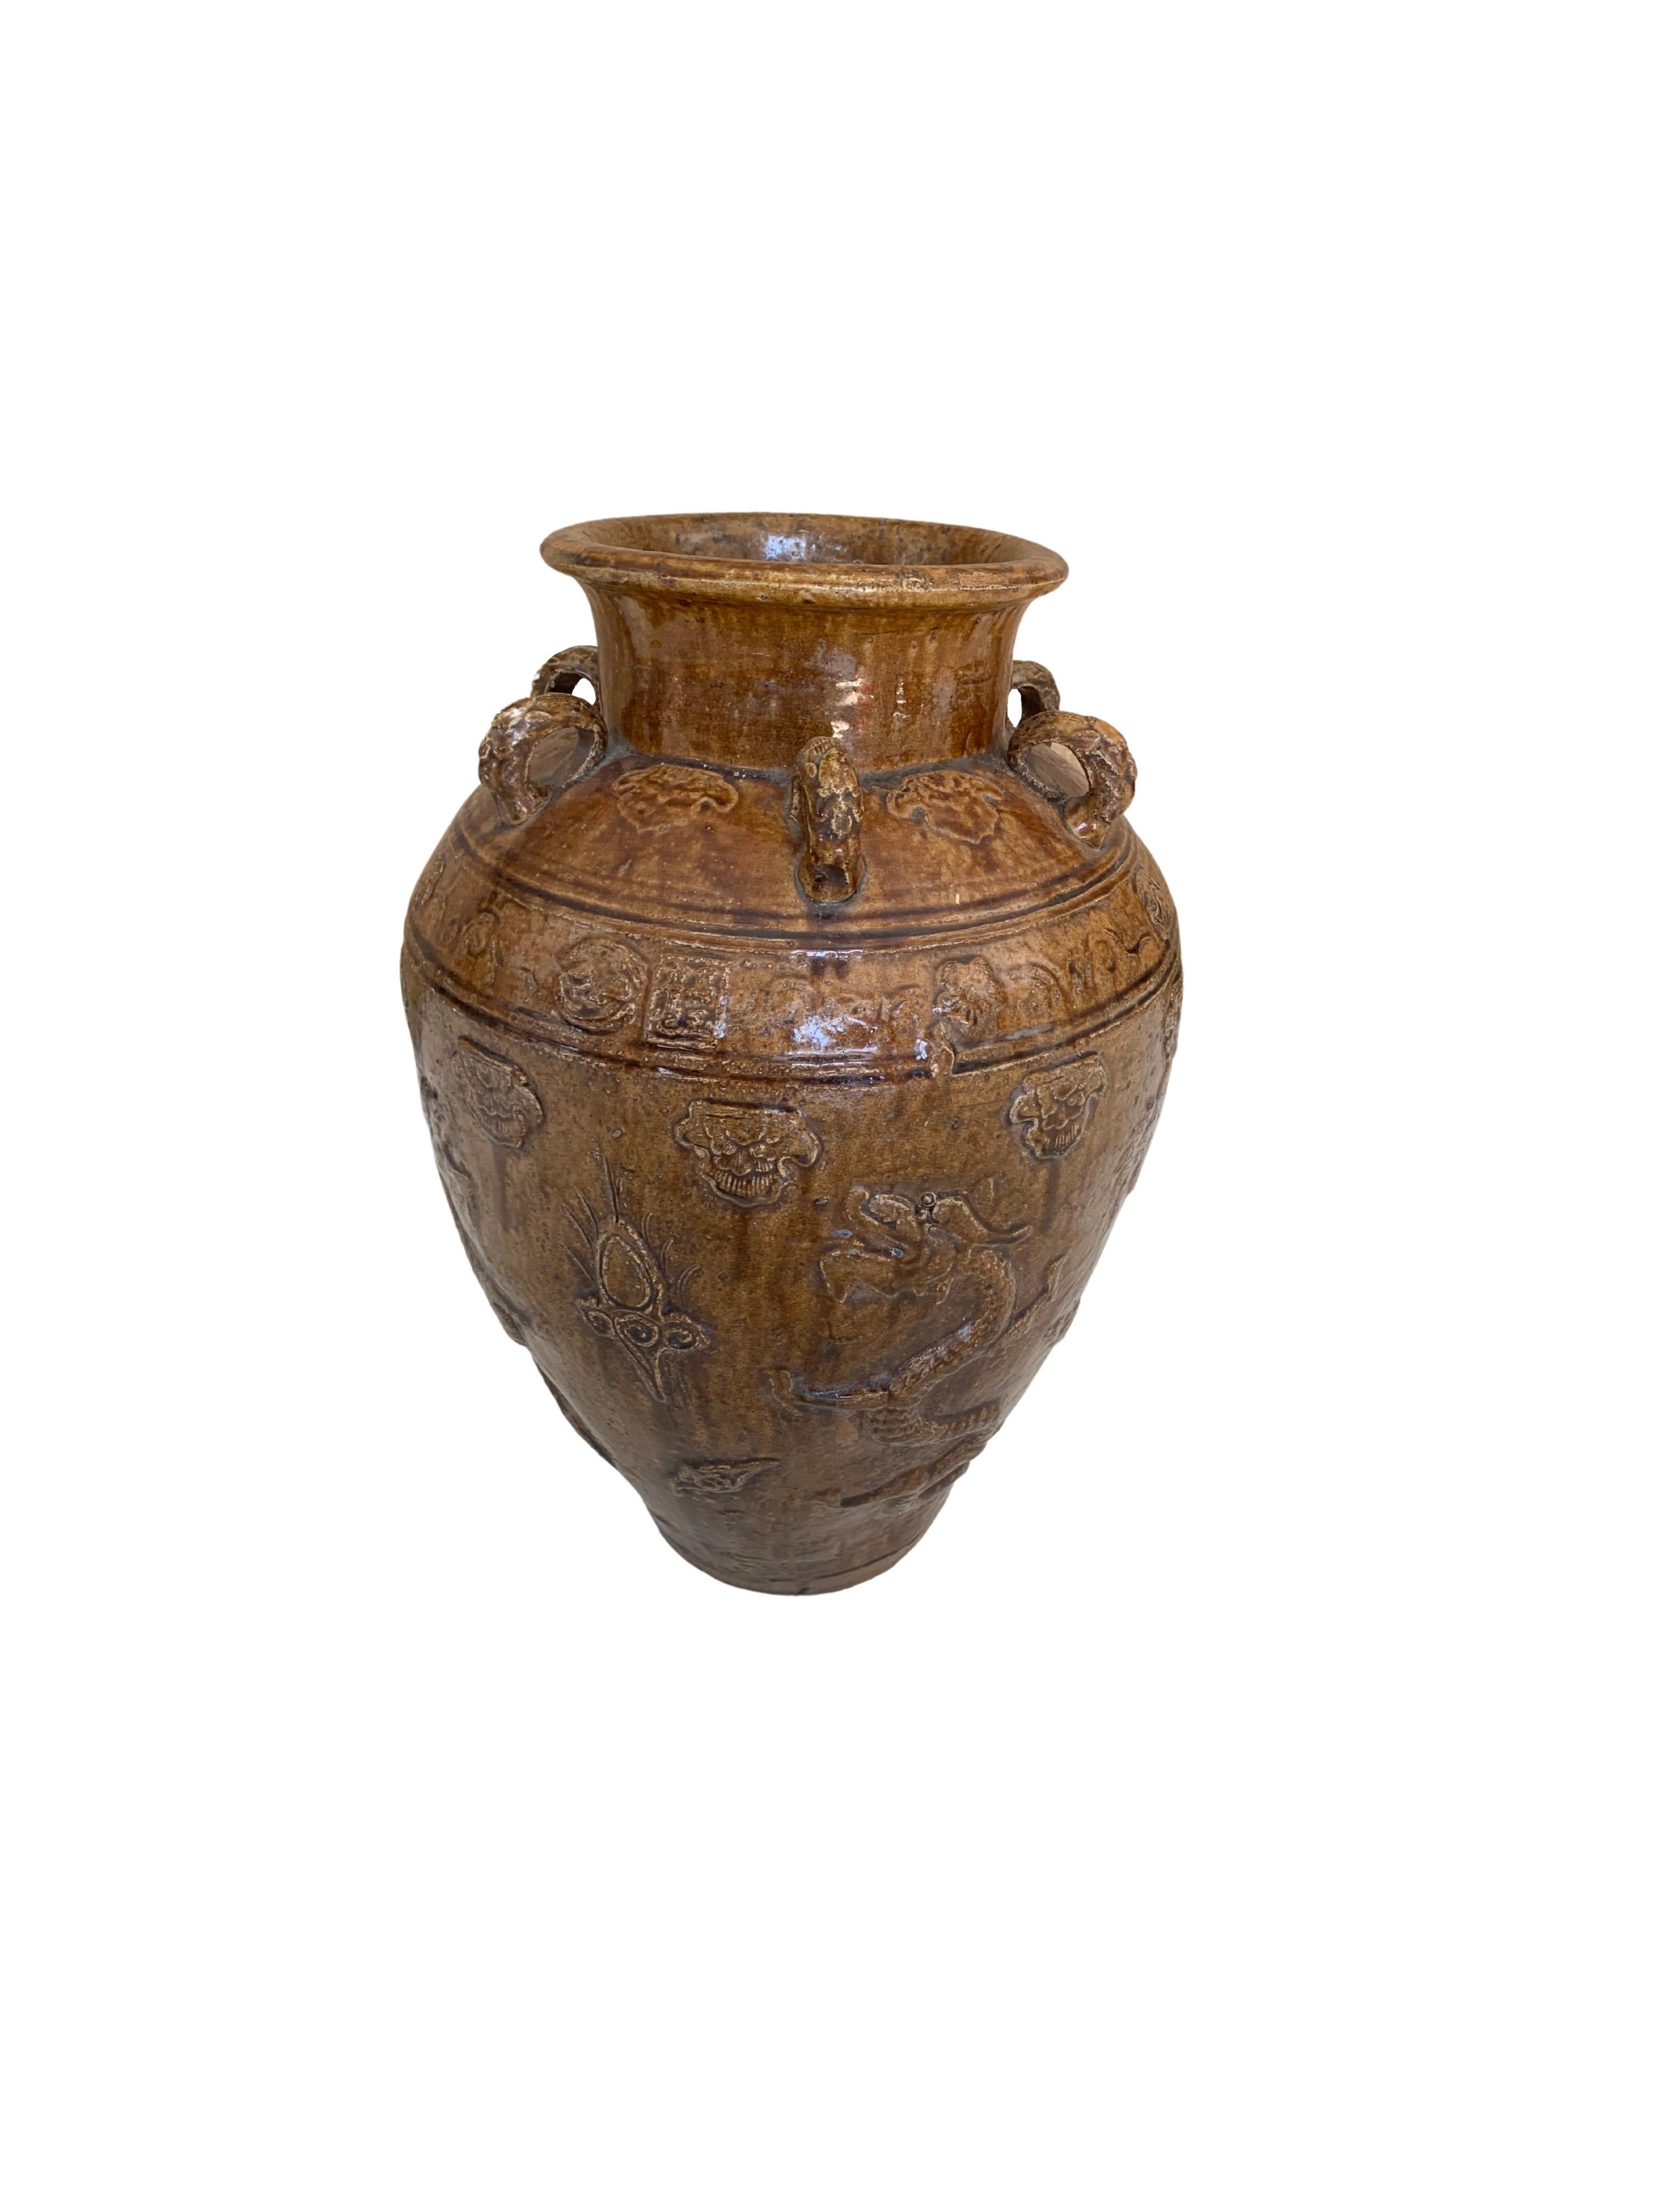 This Chinese ceramic jar features a brownish / yellow glaze. In addition tiger medallions in the shape of loops wrap around the Jar’s shoulder. These were used to secure the lid to the jar and prevent the contents from leaking. Jars such as these